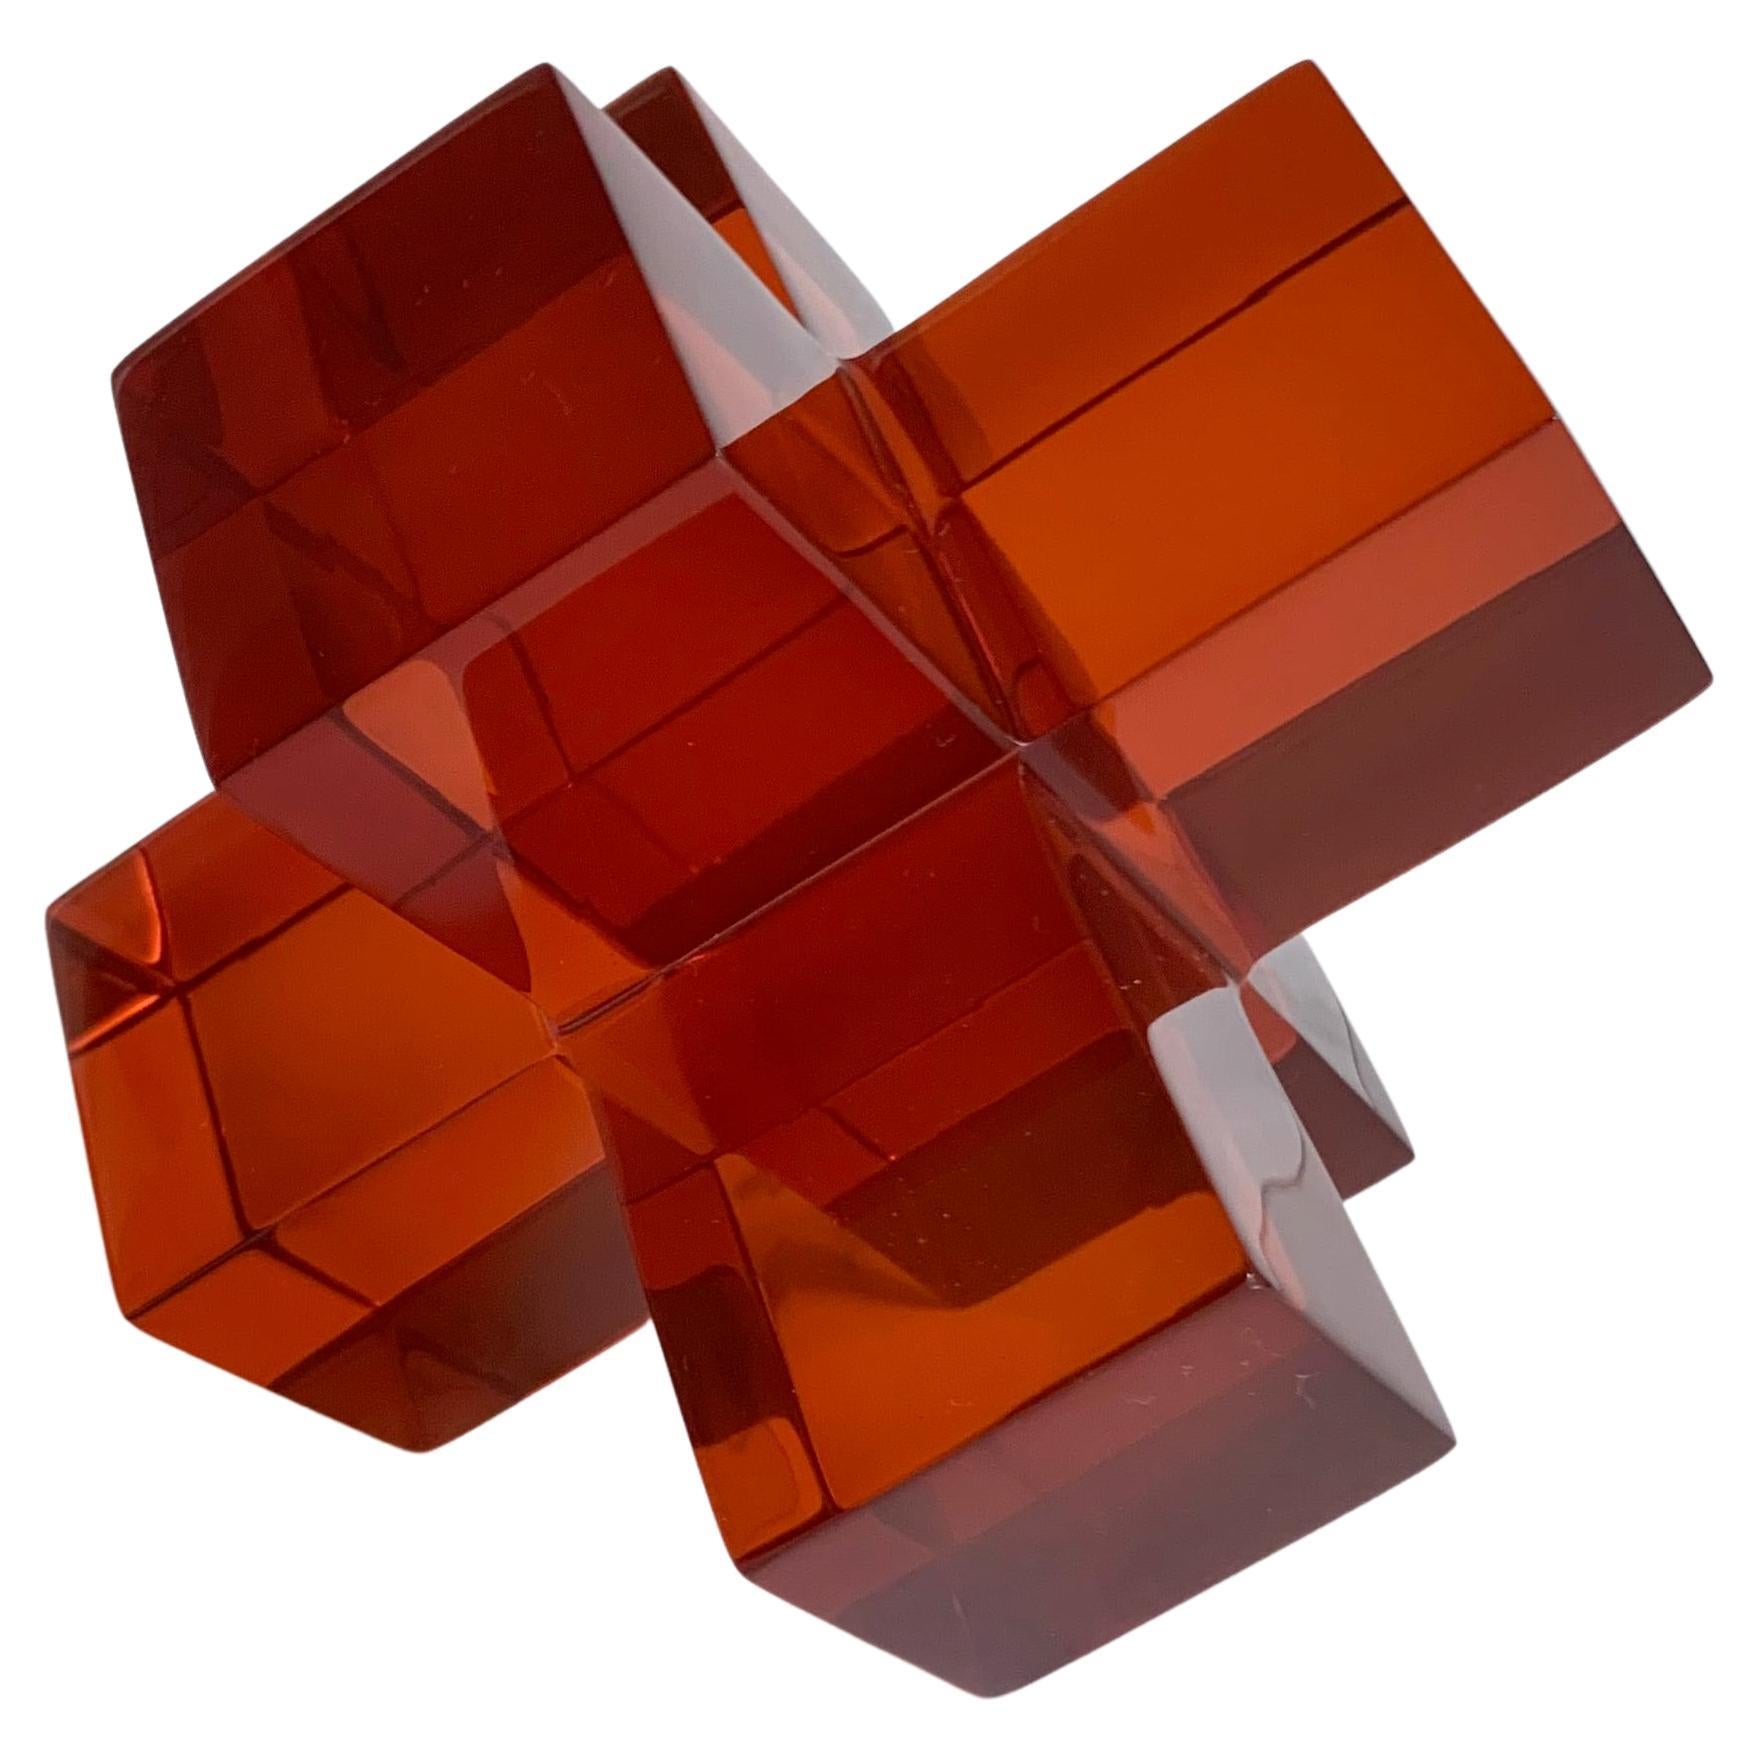 Geometric Sculpture in Polished Tangerine Resin by Paola Valle For Sale